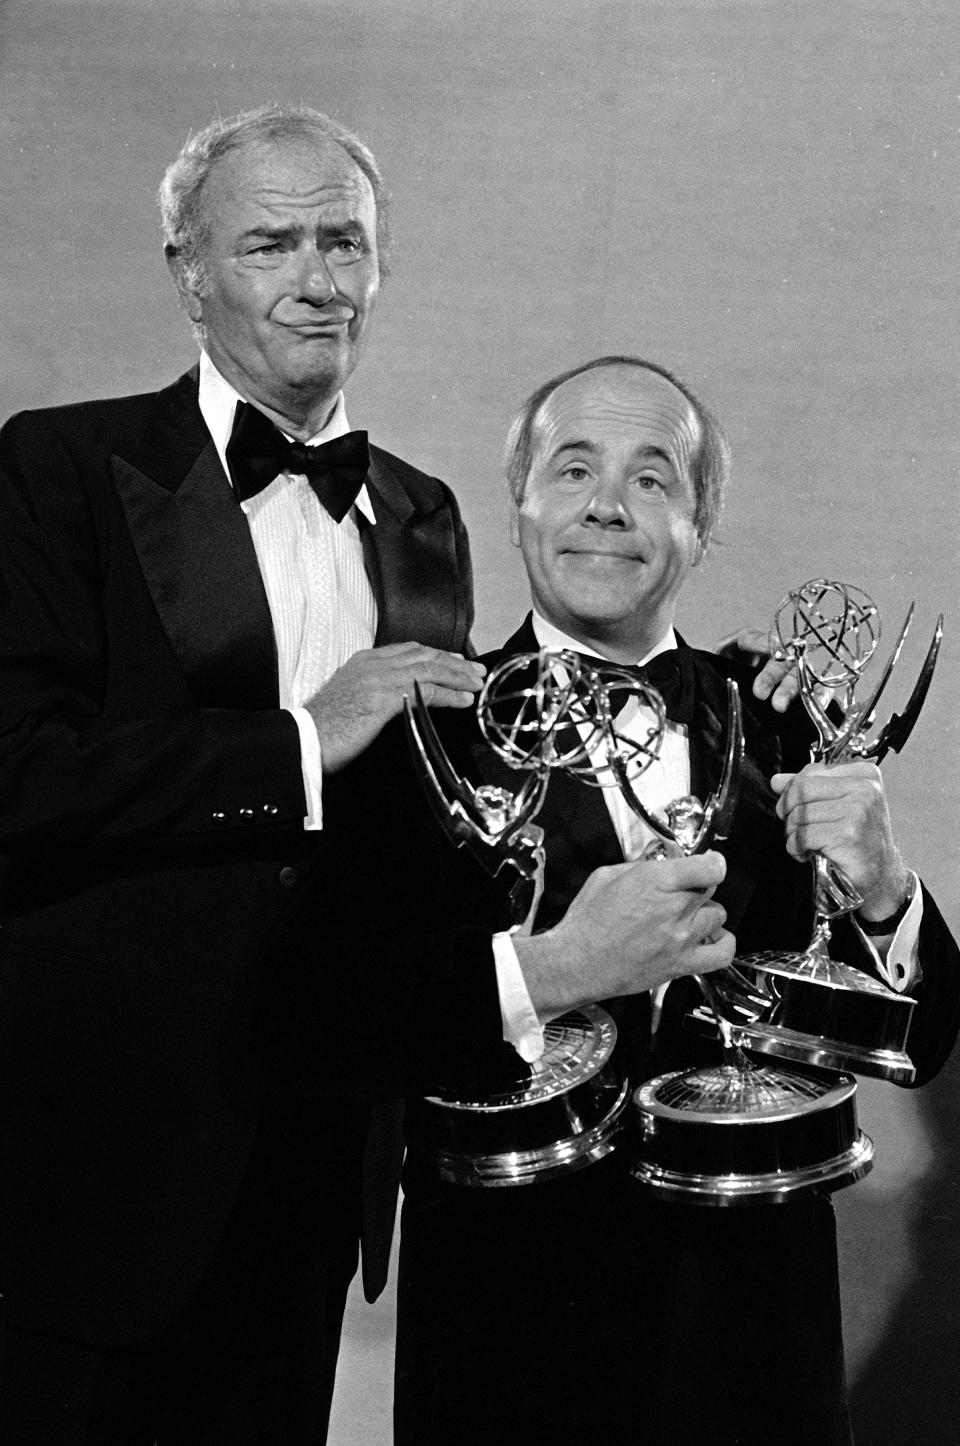 FILE - In this Sept. 18, 1978 file photo, comedians Harvey Korman, left, and Tim Conway show off three Emmy Awards for the "Carol Burnett Show" at the Pasadena Civic Auditorium, in Pasadena, Calif. Conway, the stellar second banana to Carol Burnett who won four Emmy Awards on her TV variety show, has died, according to his publicist. He was 85. Conway died Tuesday morning, May 14, 2019, after a long illness in Los Angeles, according to Howard Bragman, who heads LaBrea Media. (AP Photo/David Yarnold, File)